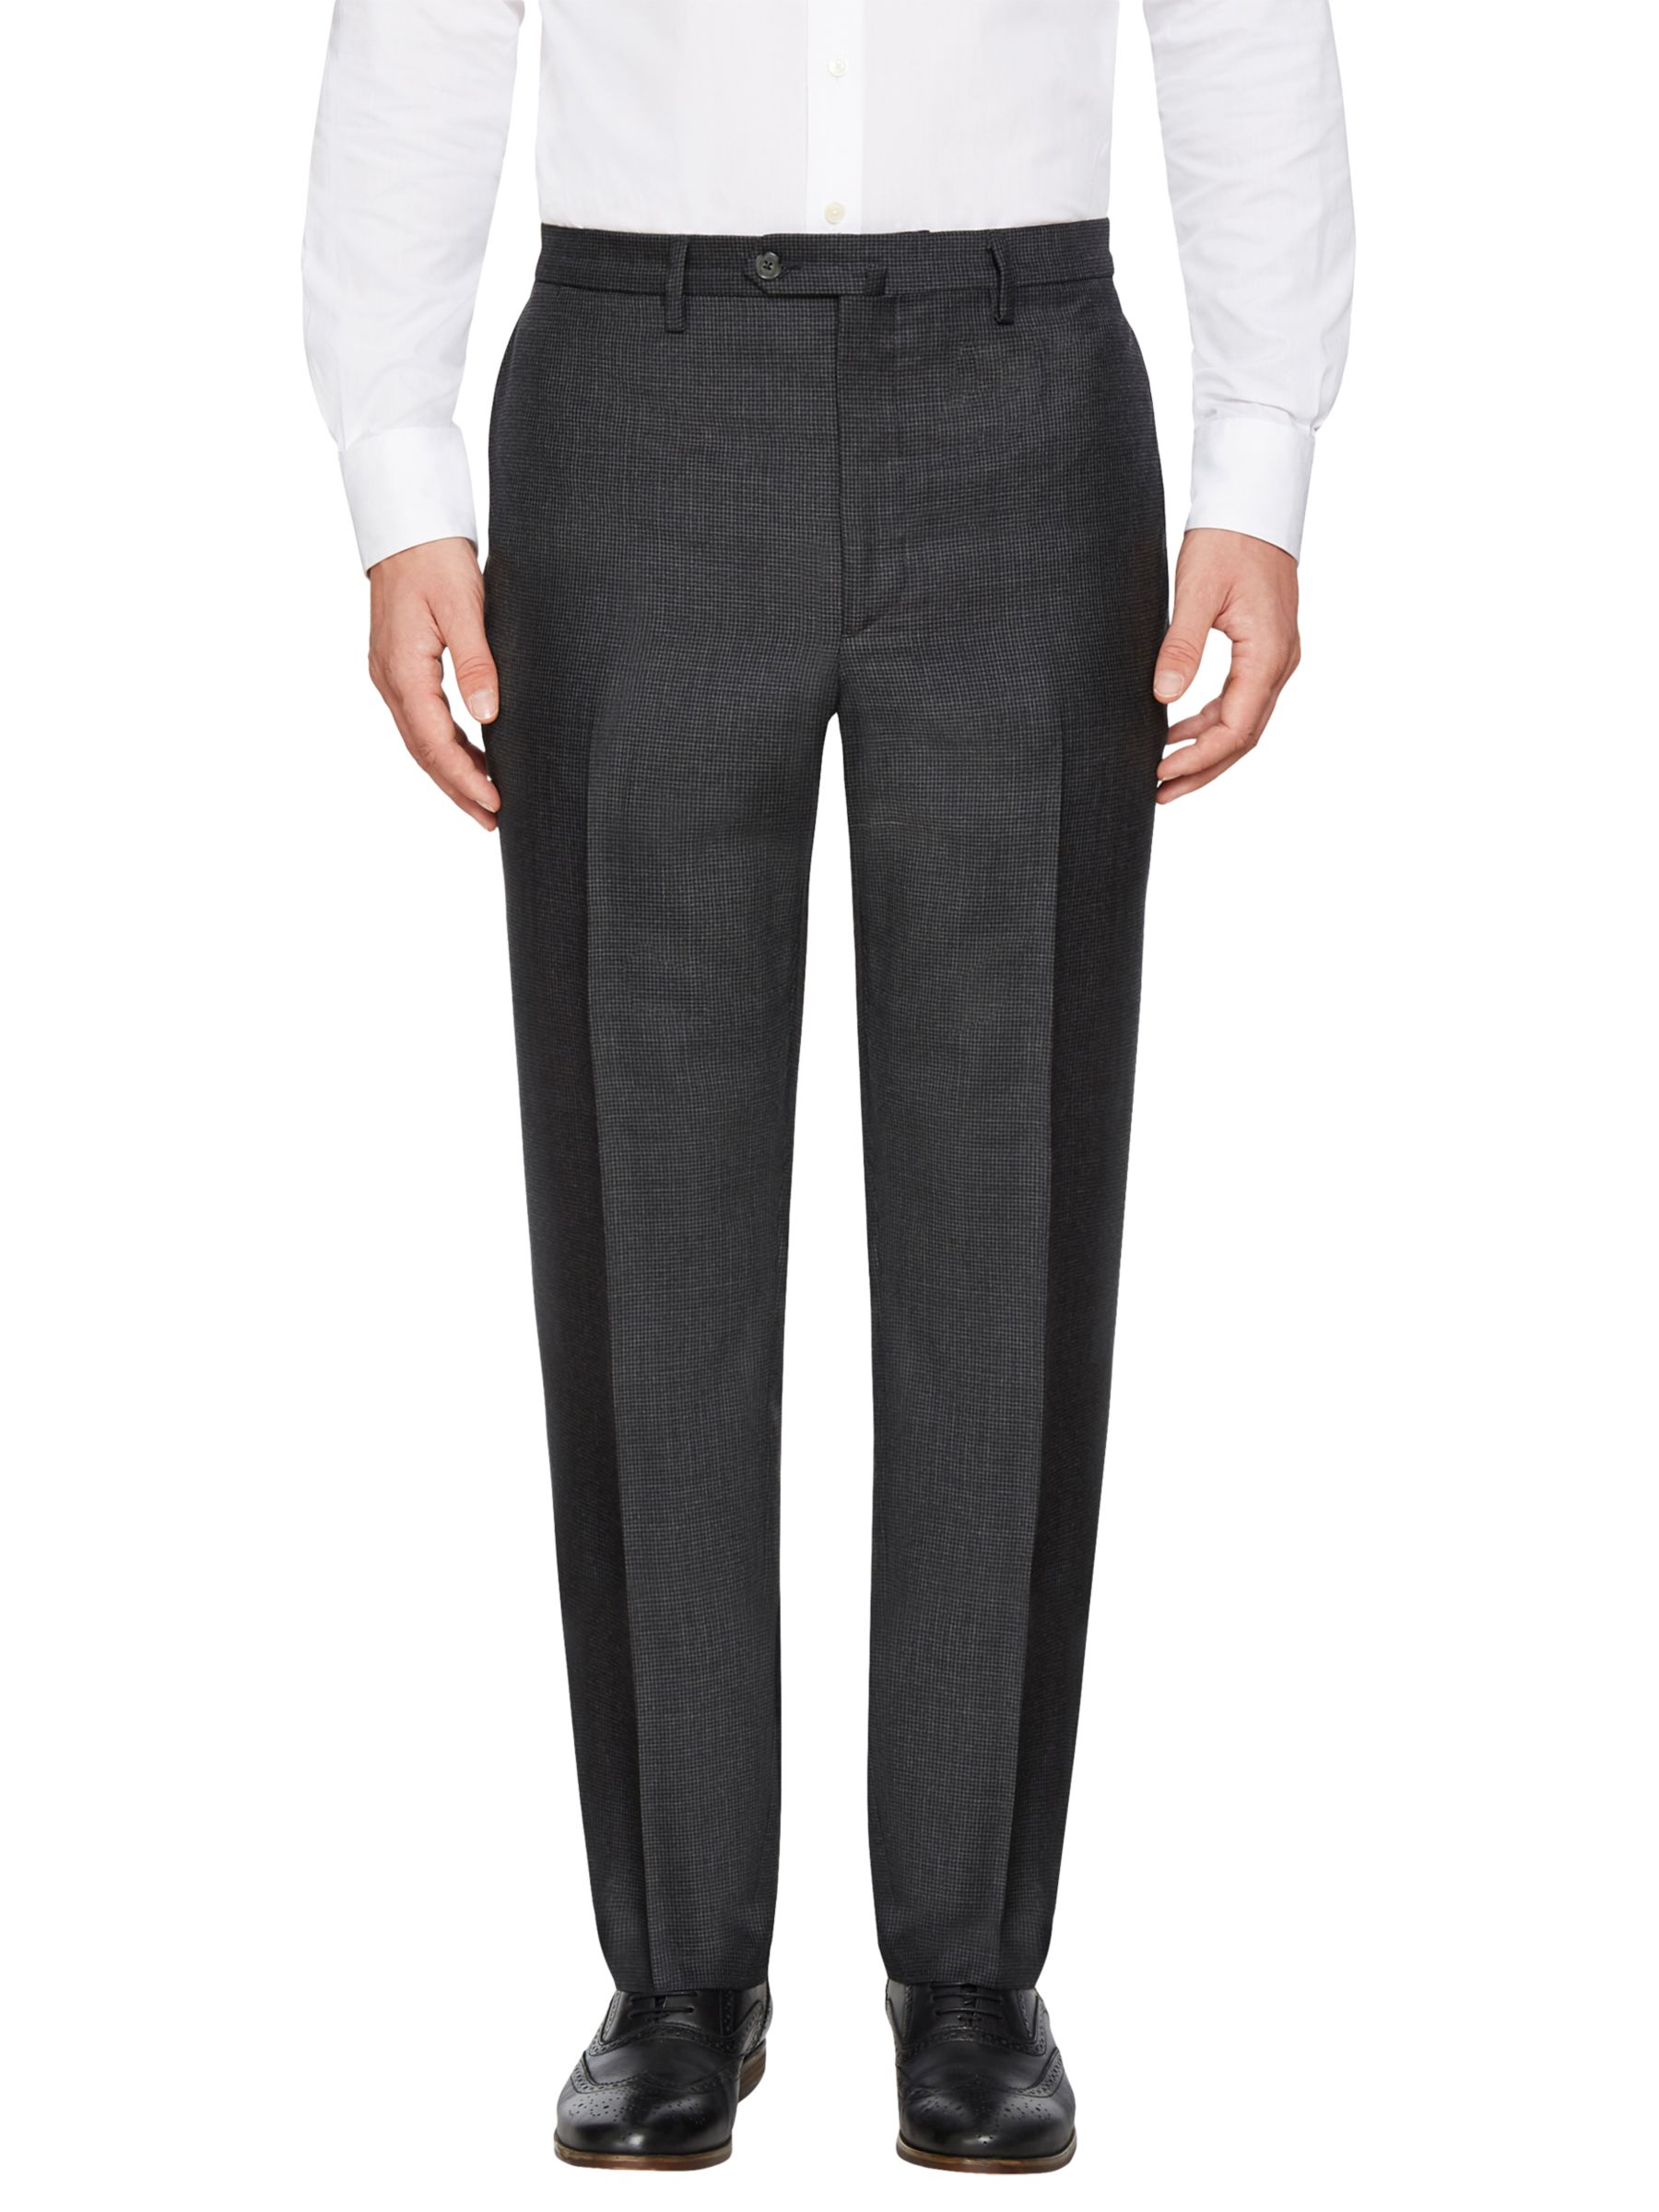 Hackett London Wool Puppytooth Regular Fit Suit Trousers, Charcoal, 36R